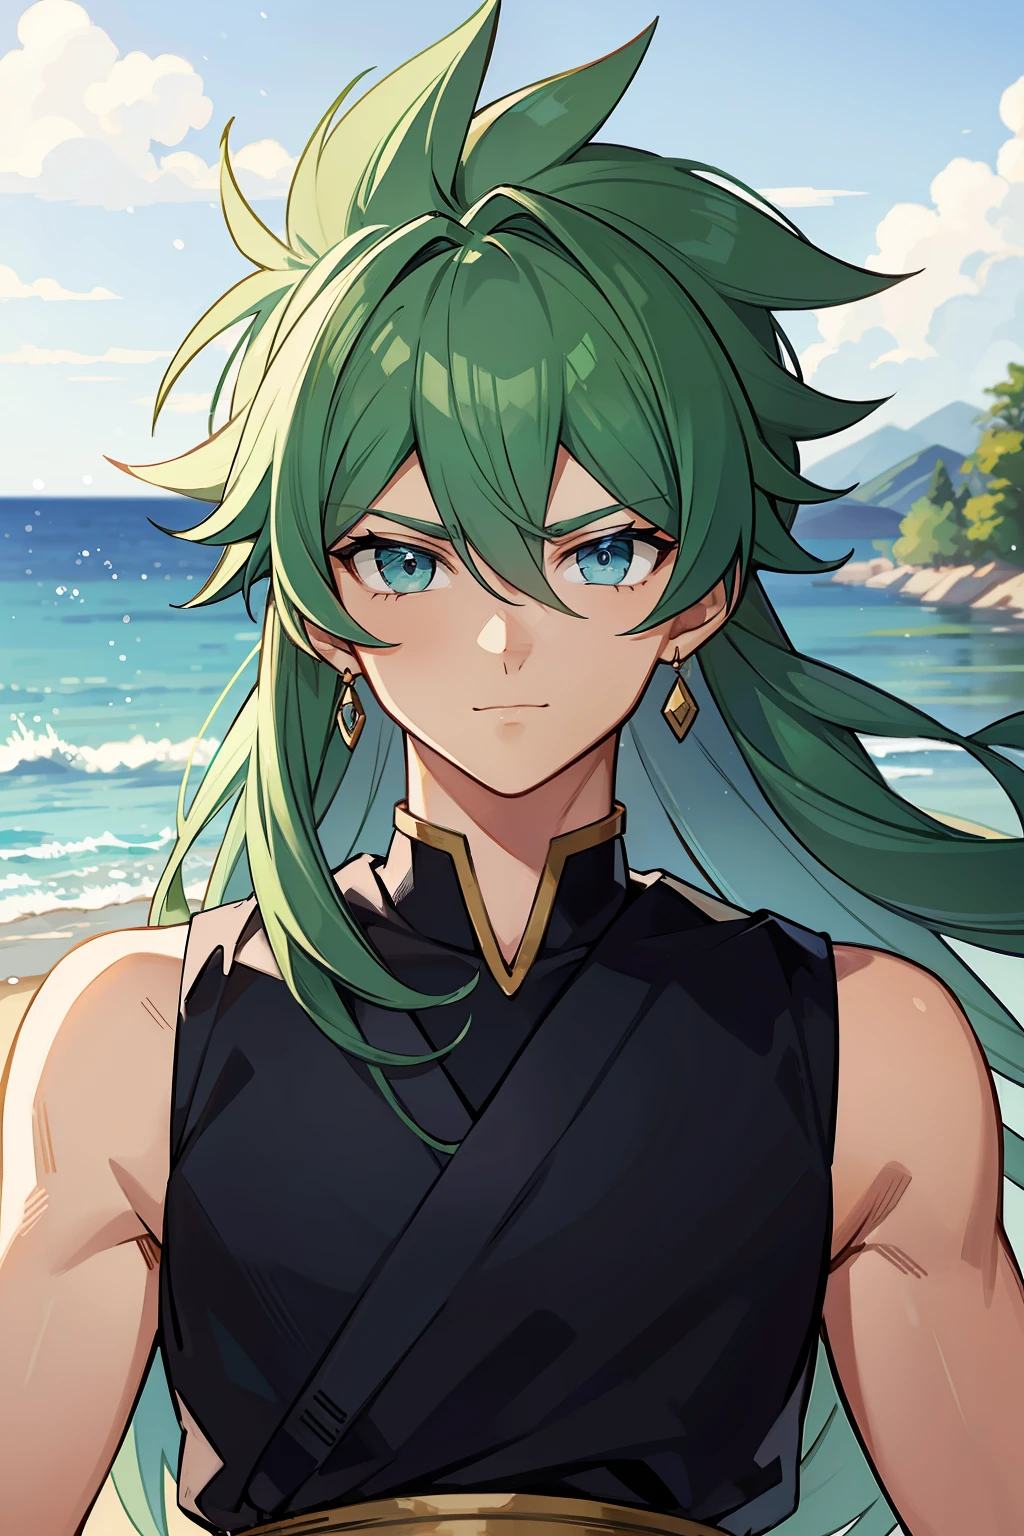 (high-quality, breathtaking),(expressive eyes, perfect face) 1boy, male, solo, young adult , light blue hair, green coloured eyes, stylised hair, gentle smile, long length hair, loose hair, side bangs, curley hair, really spiky hair, spiked up hair, looking at viewer, portrait, ancient greek clothes, blue tunic, white Chlamys, sleeveless, greek, blue and gold sash, ocean background, laurel accessory, slightly narrow eyes, masculine face, masculine eyes